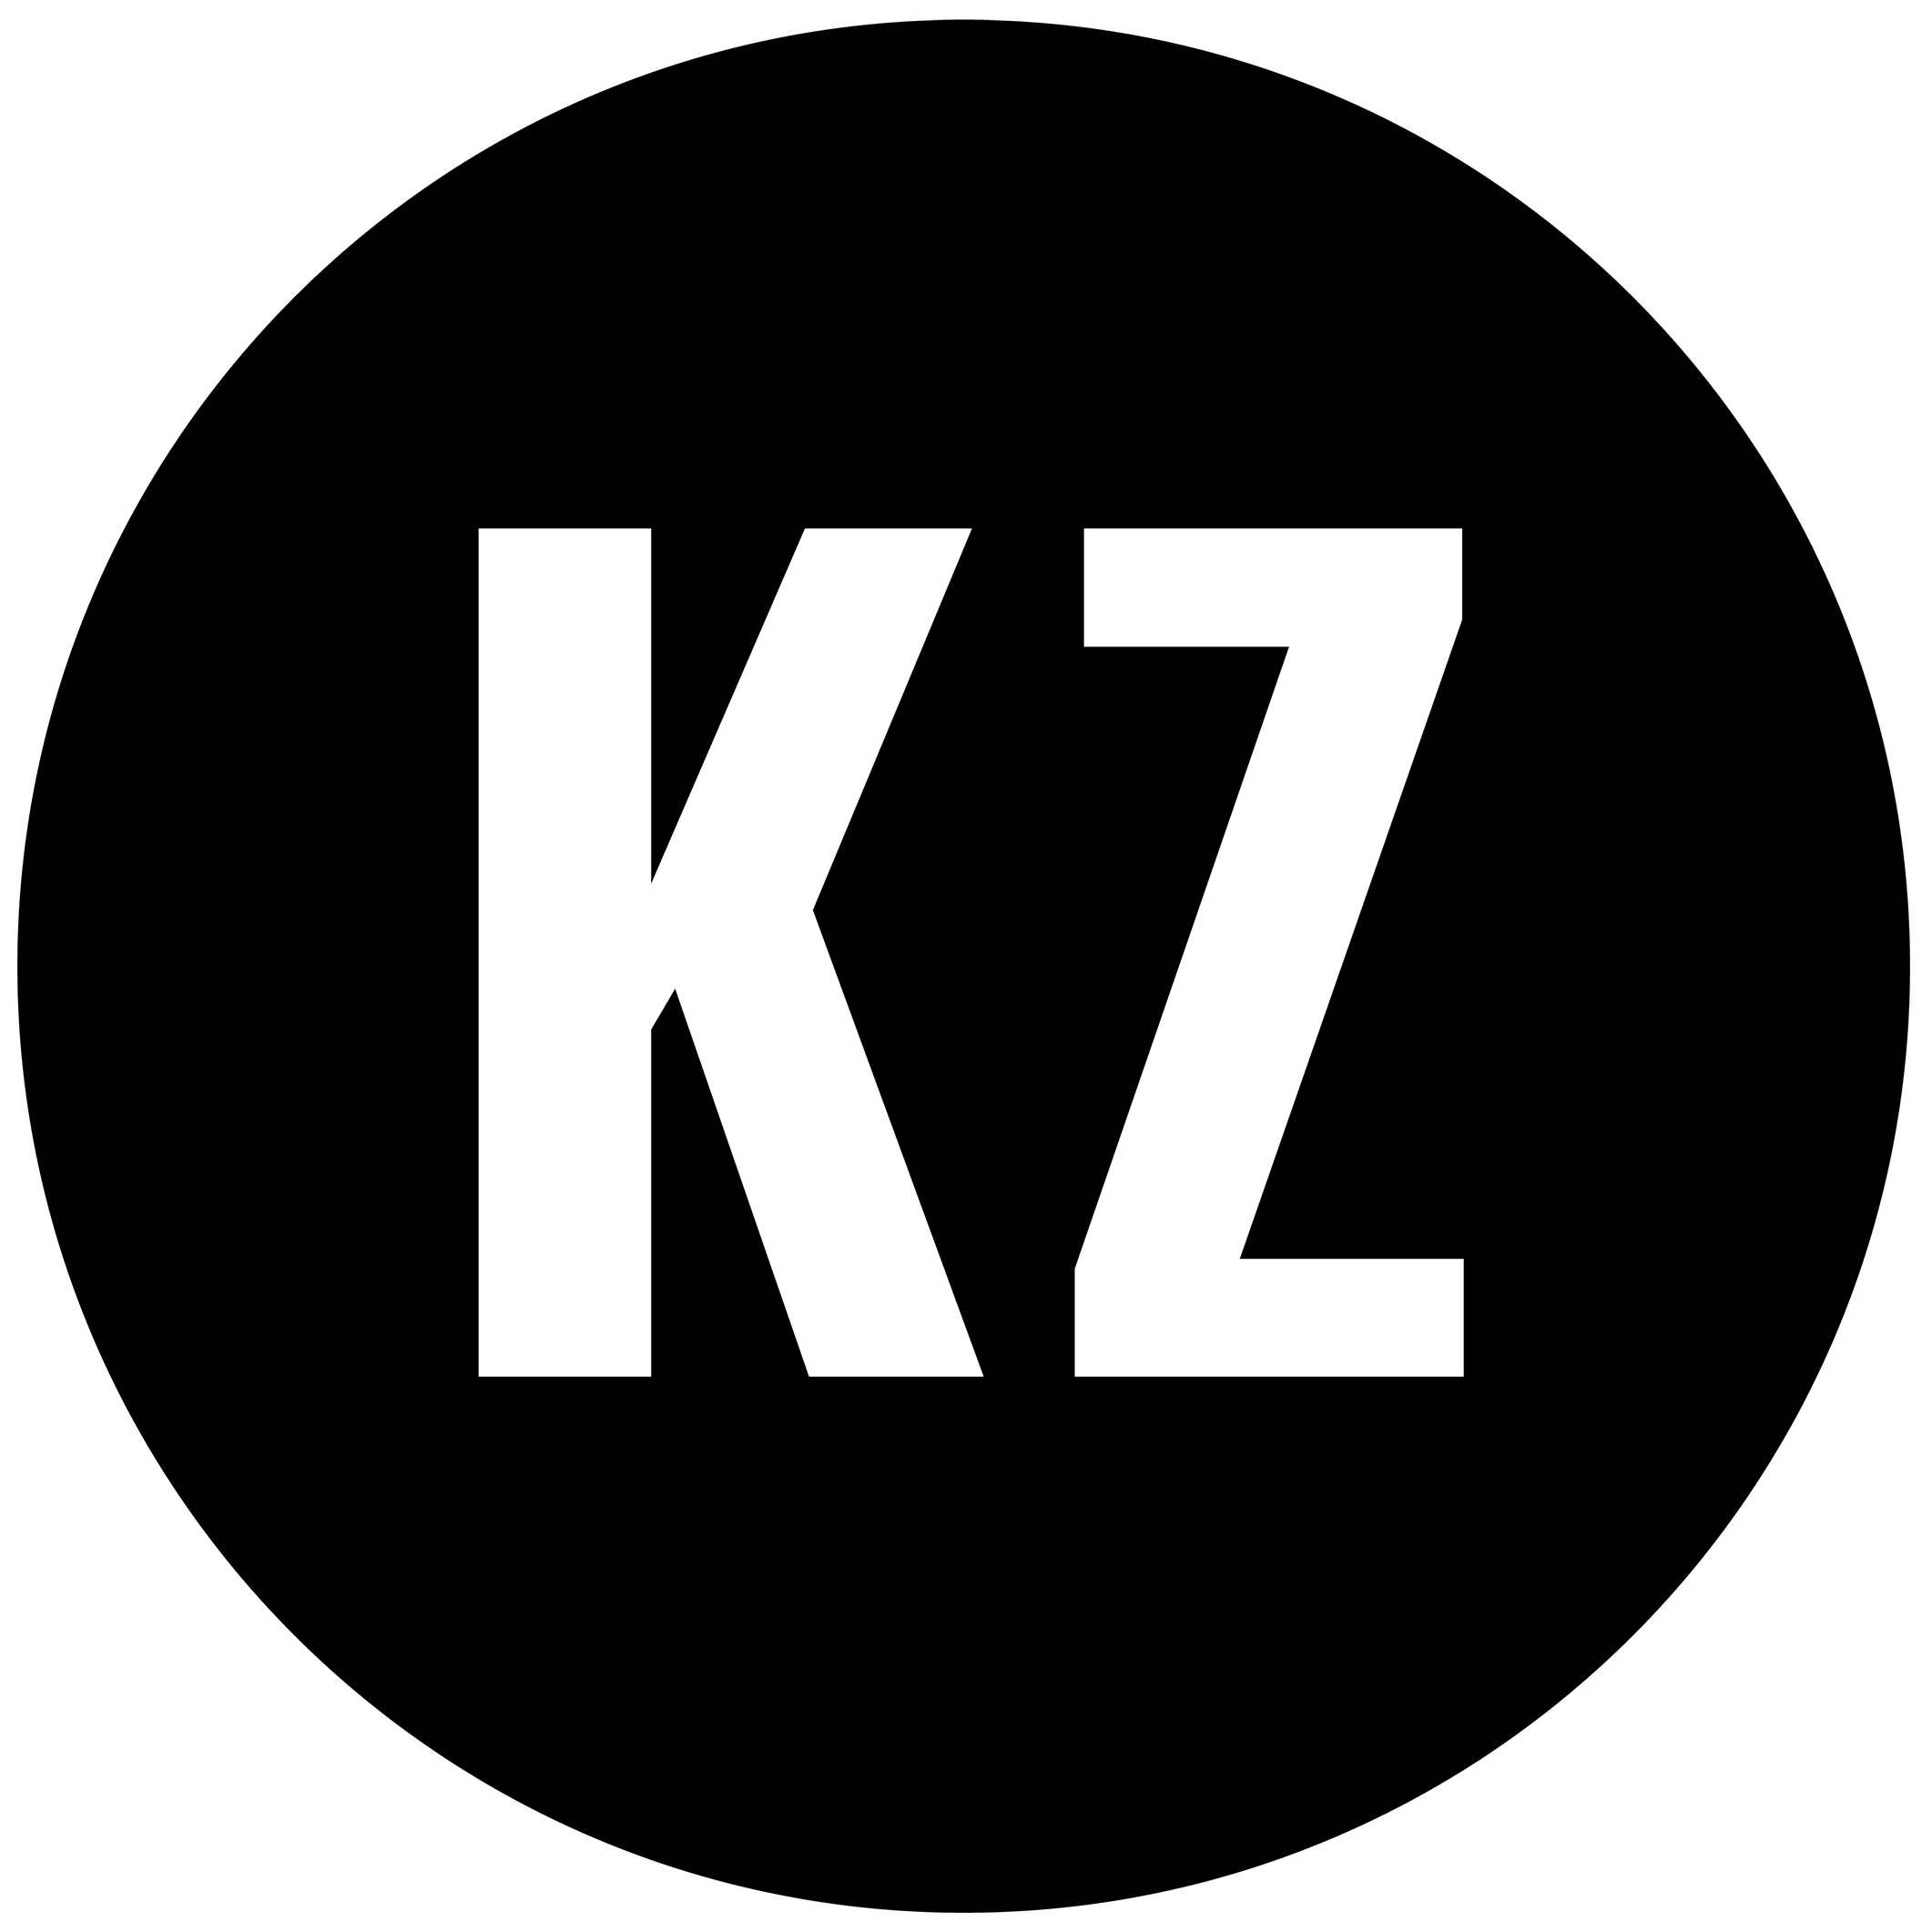 The KZ Project